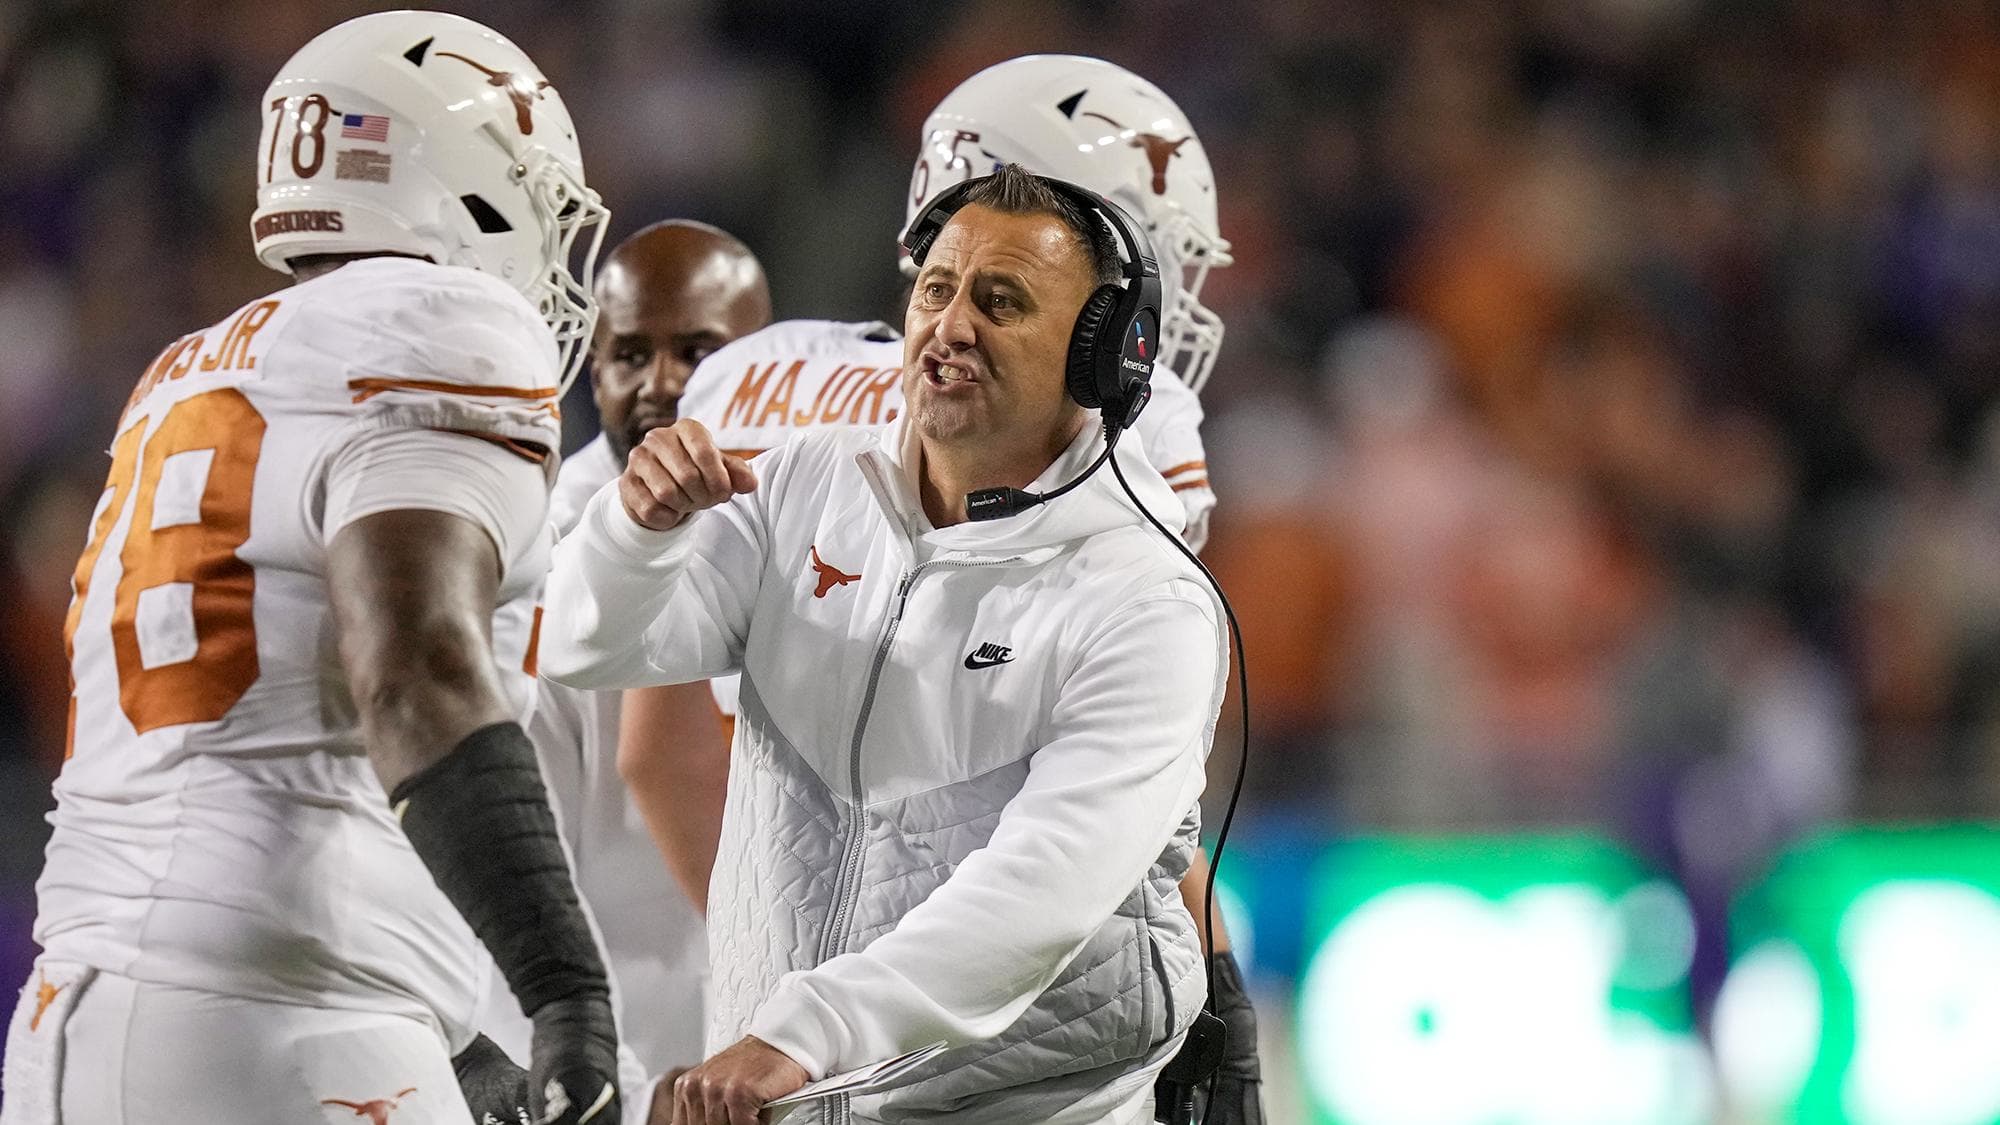 Texas Longhorns Football Players Secure Several Spots on CBS Sports’ Top 100 List